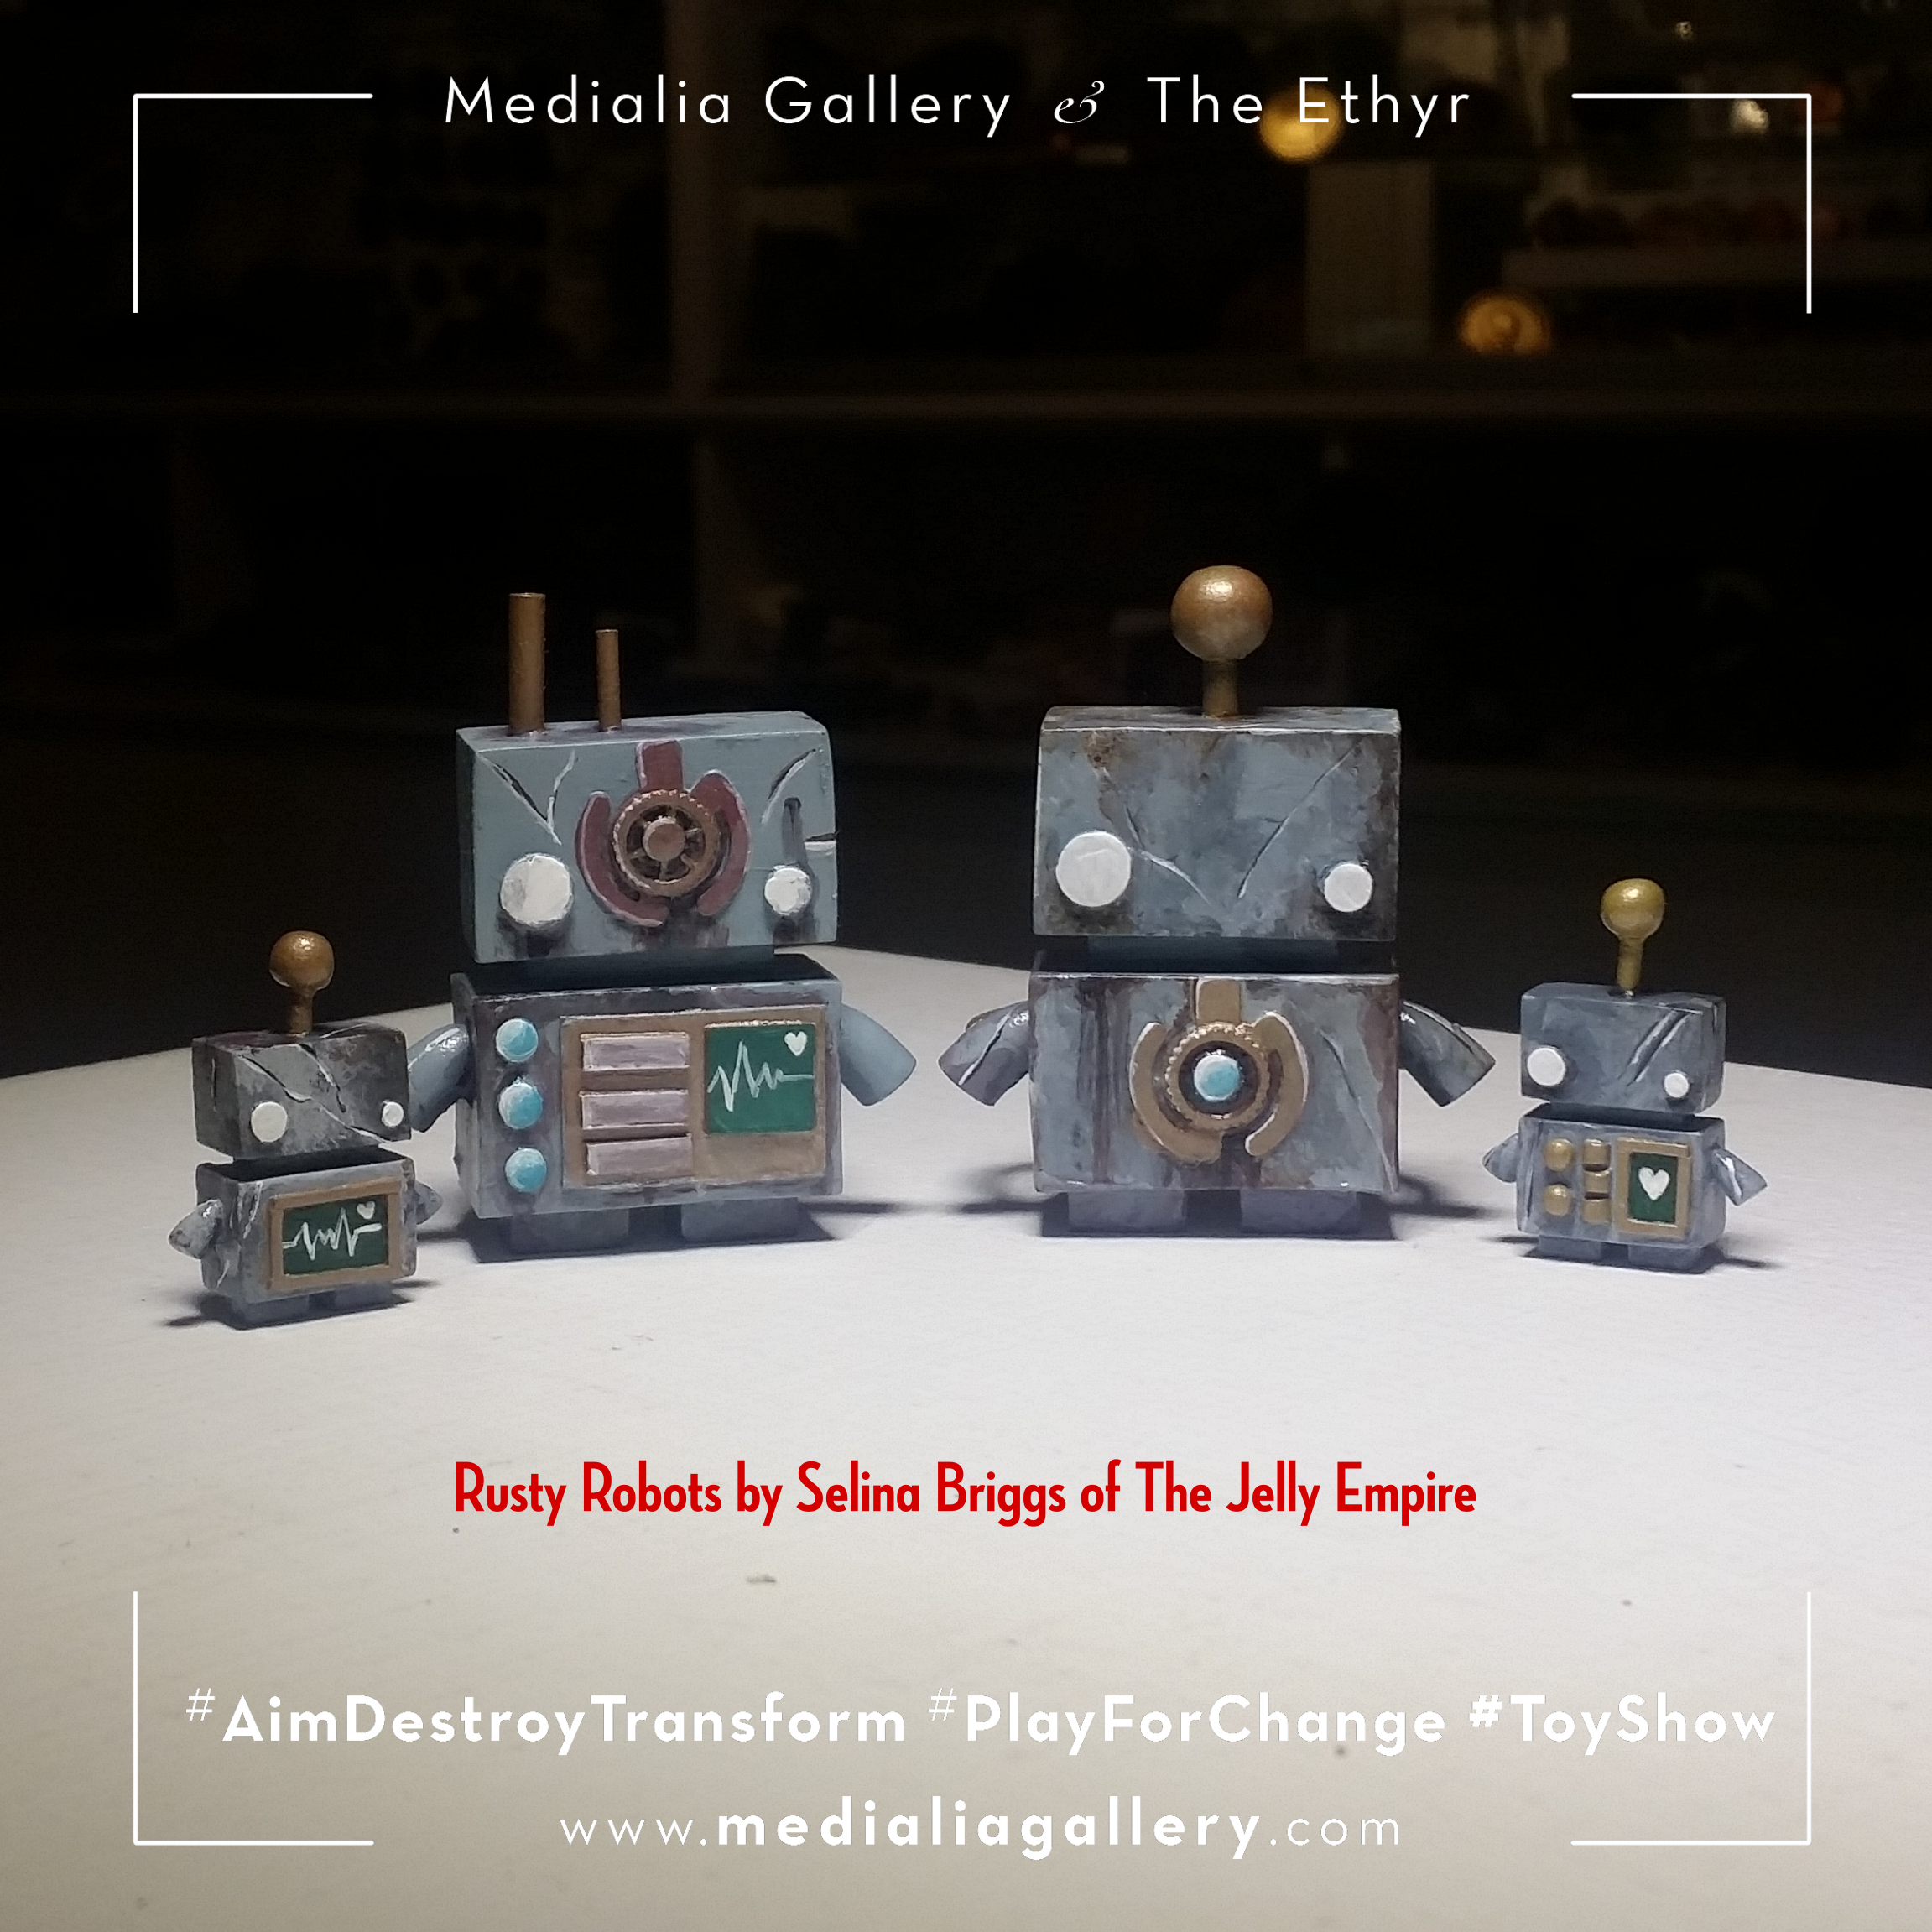 MedialiaGallery_The_Ethyr_AimDestroyTransform_Toy_Show_announcement_The_Jelly_Empire_Robots_Selina_Briggs_VII_November_2017.jpg.png